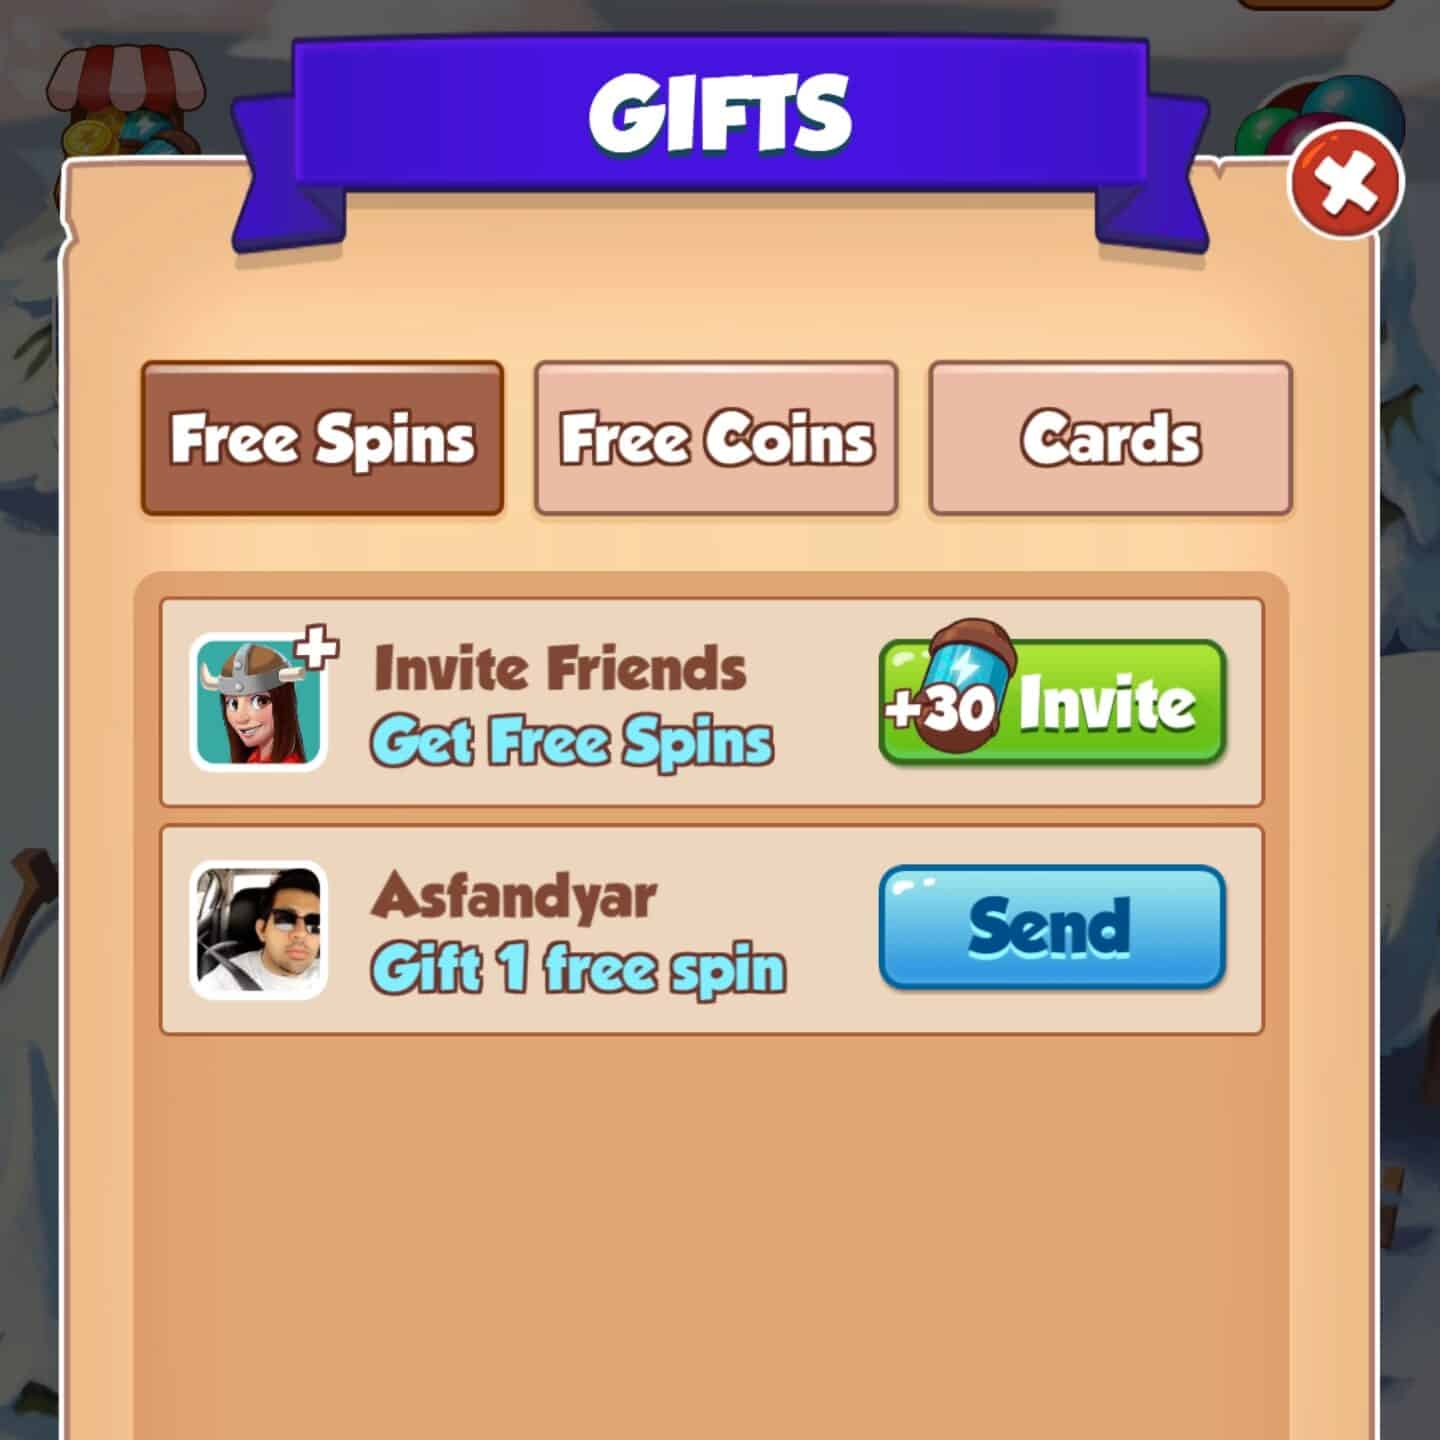 Sending gifts is a good way to gain free spins